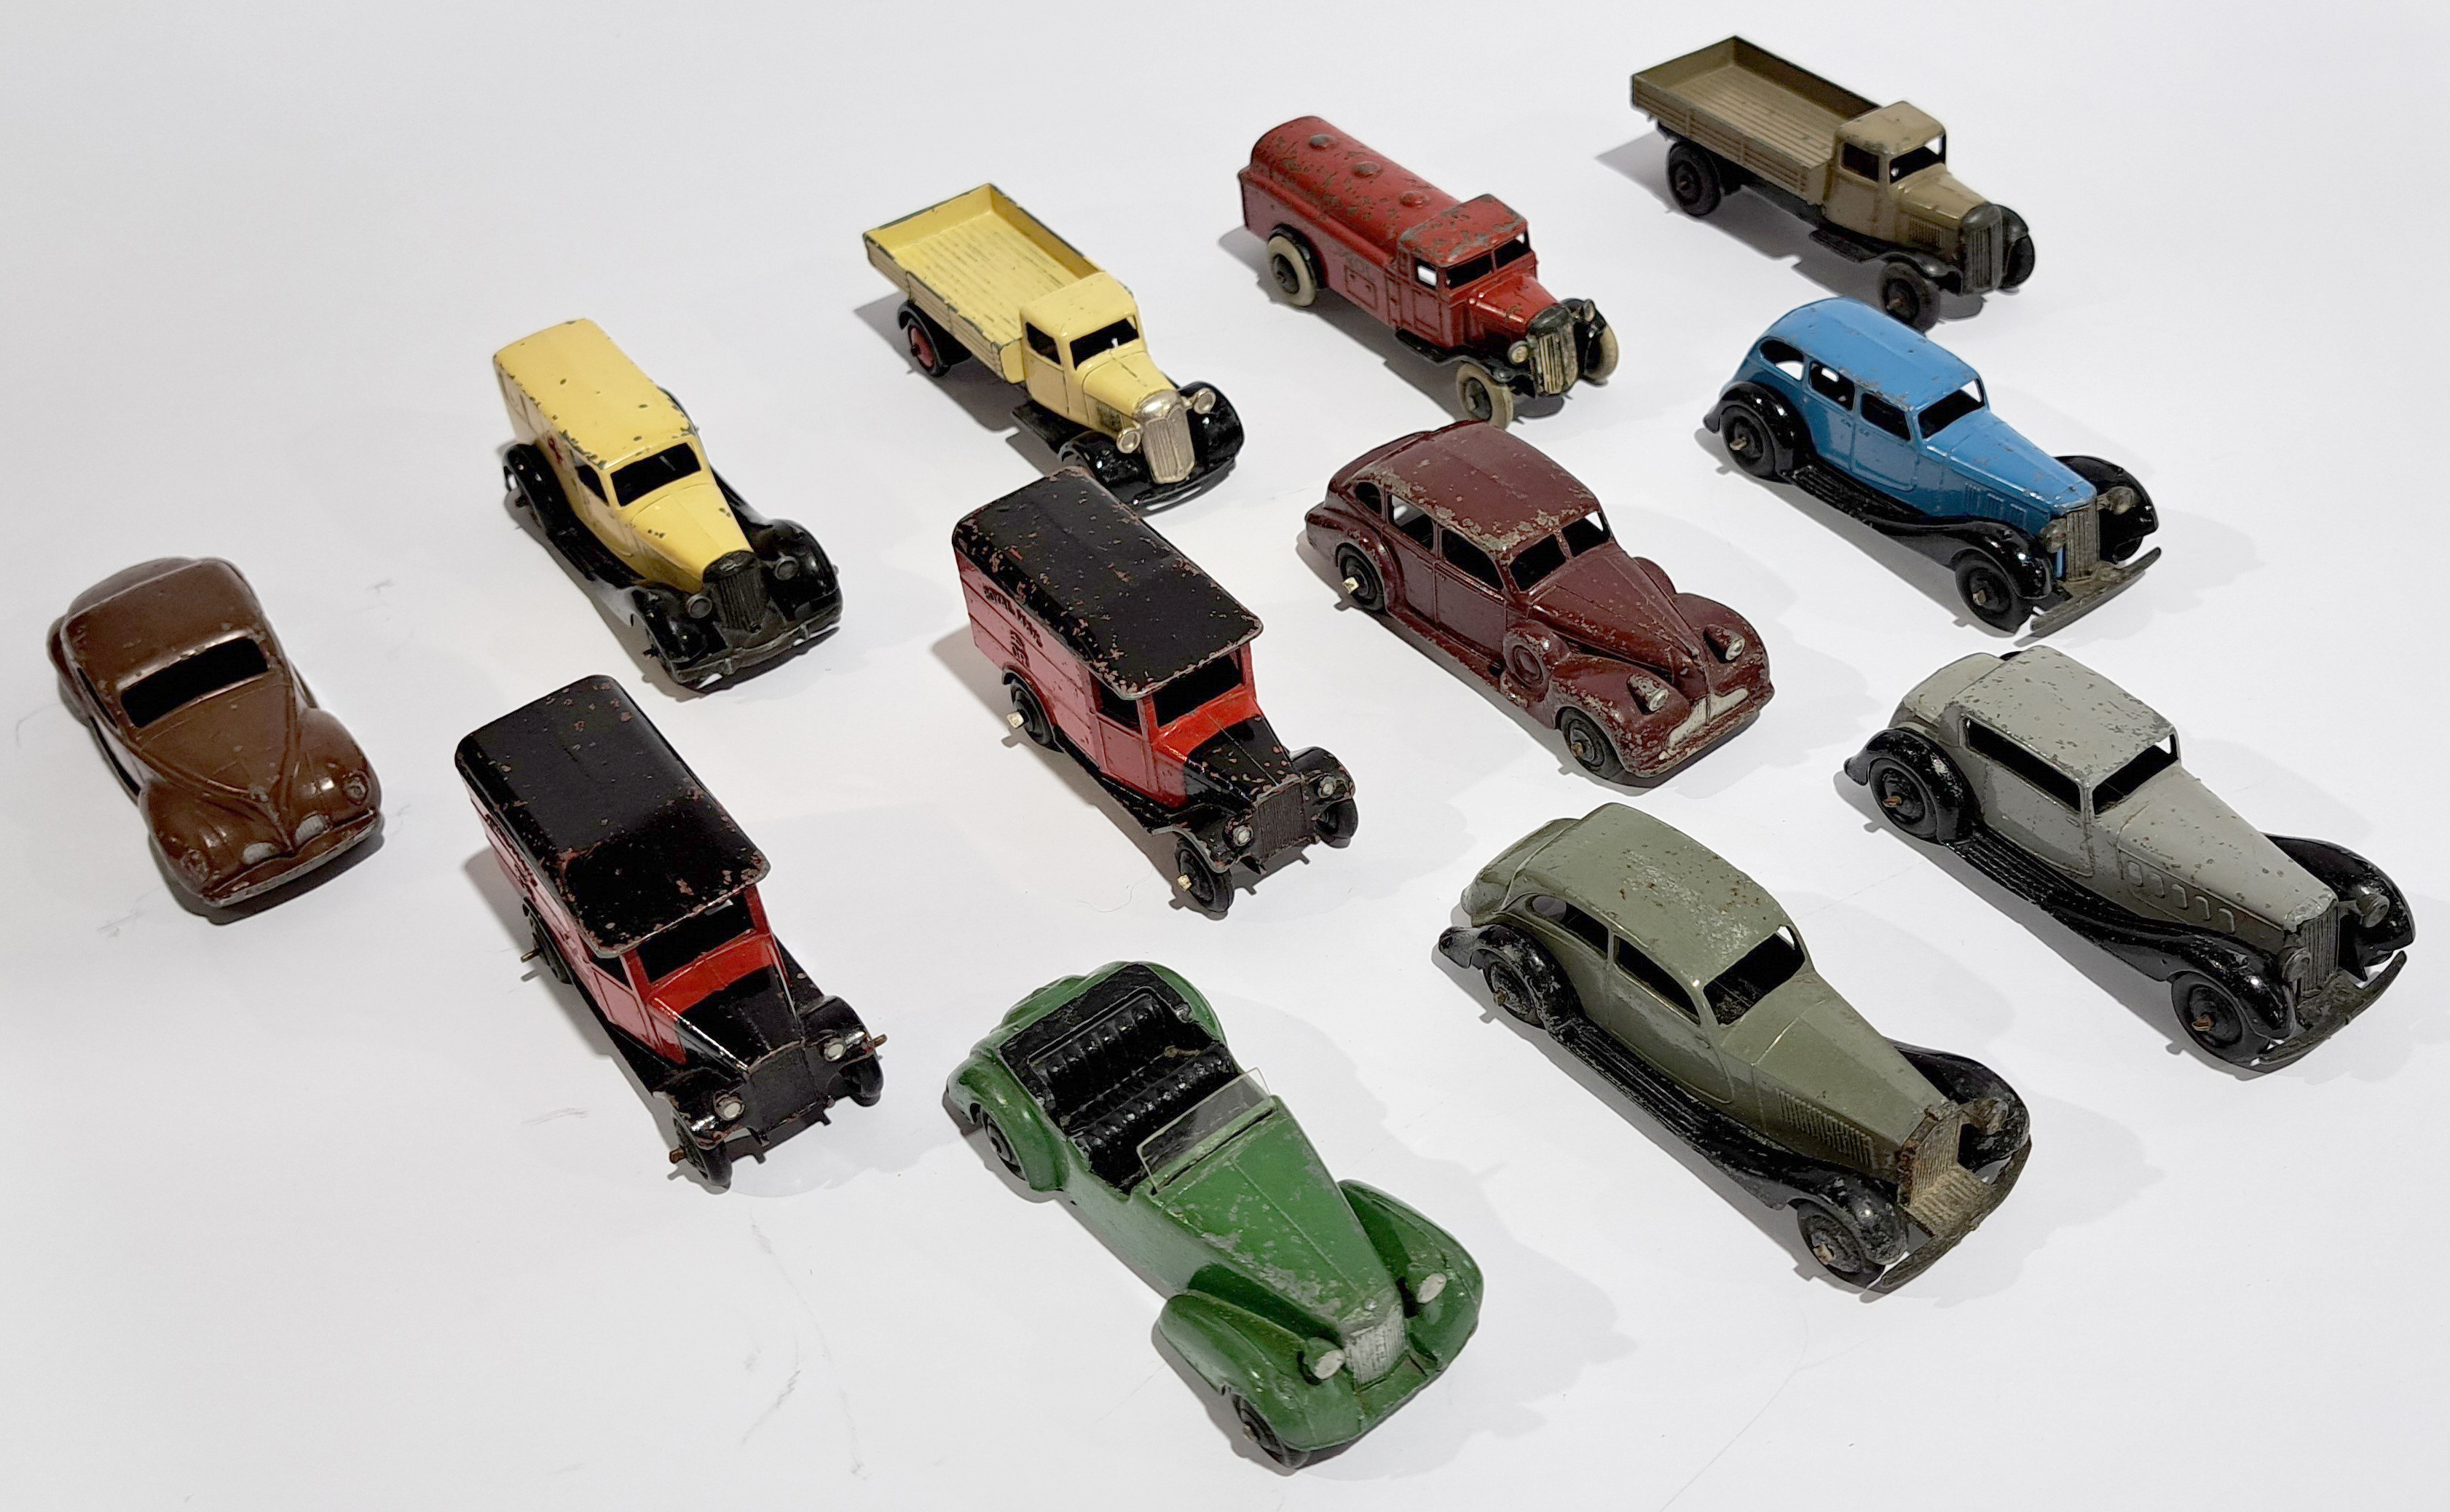 Dinky & similar, an unboxed vintage vehicle group